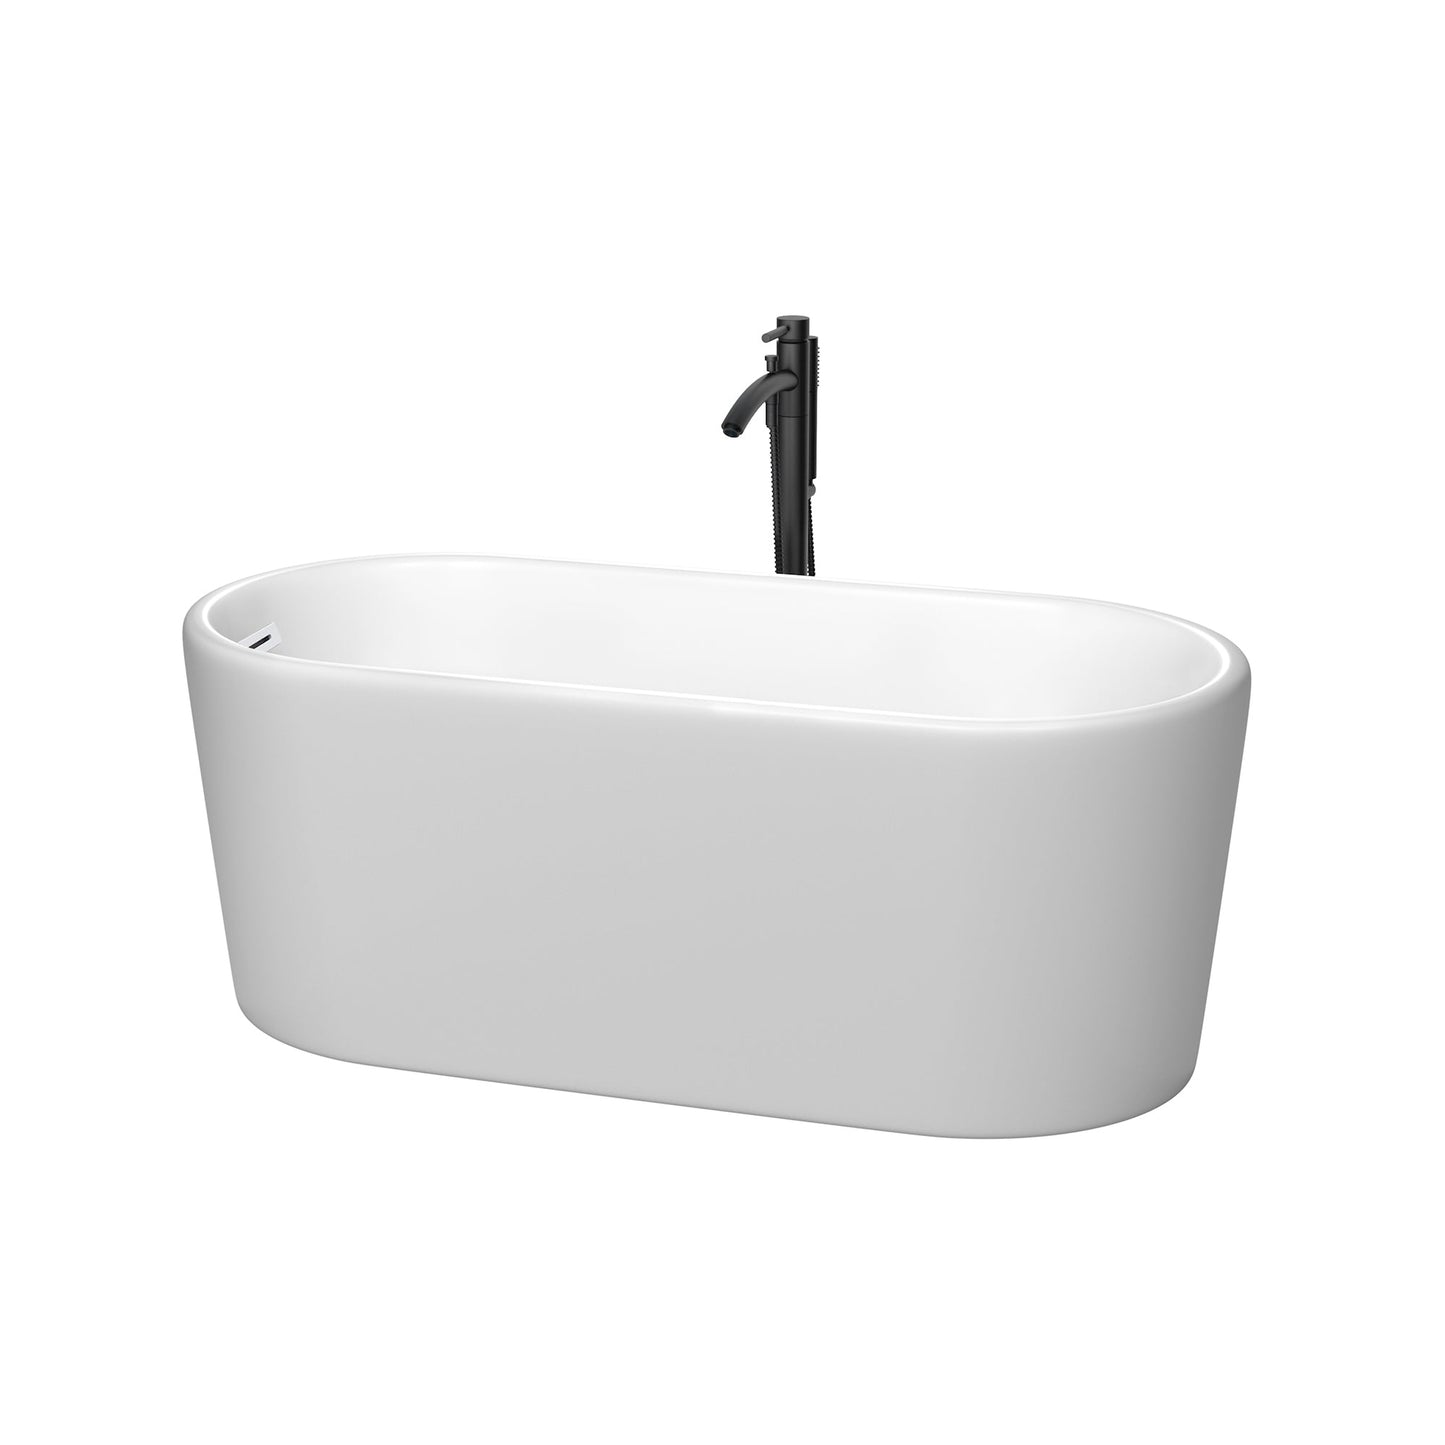 Wyndham Collection Ursula 59" Freestanding Bathtub in Matte White With Shiny White Trim and Floor Mounted Faucet in Matte Black